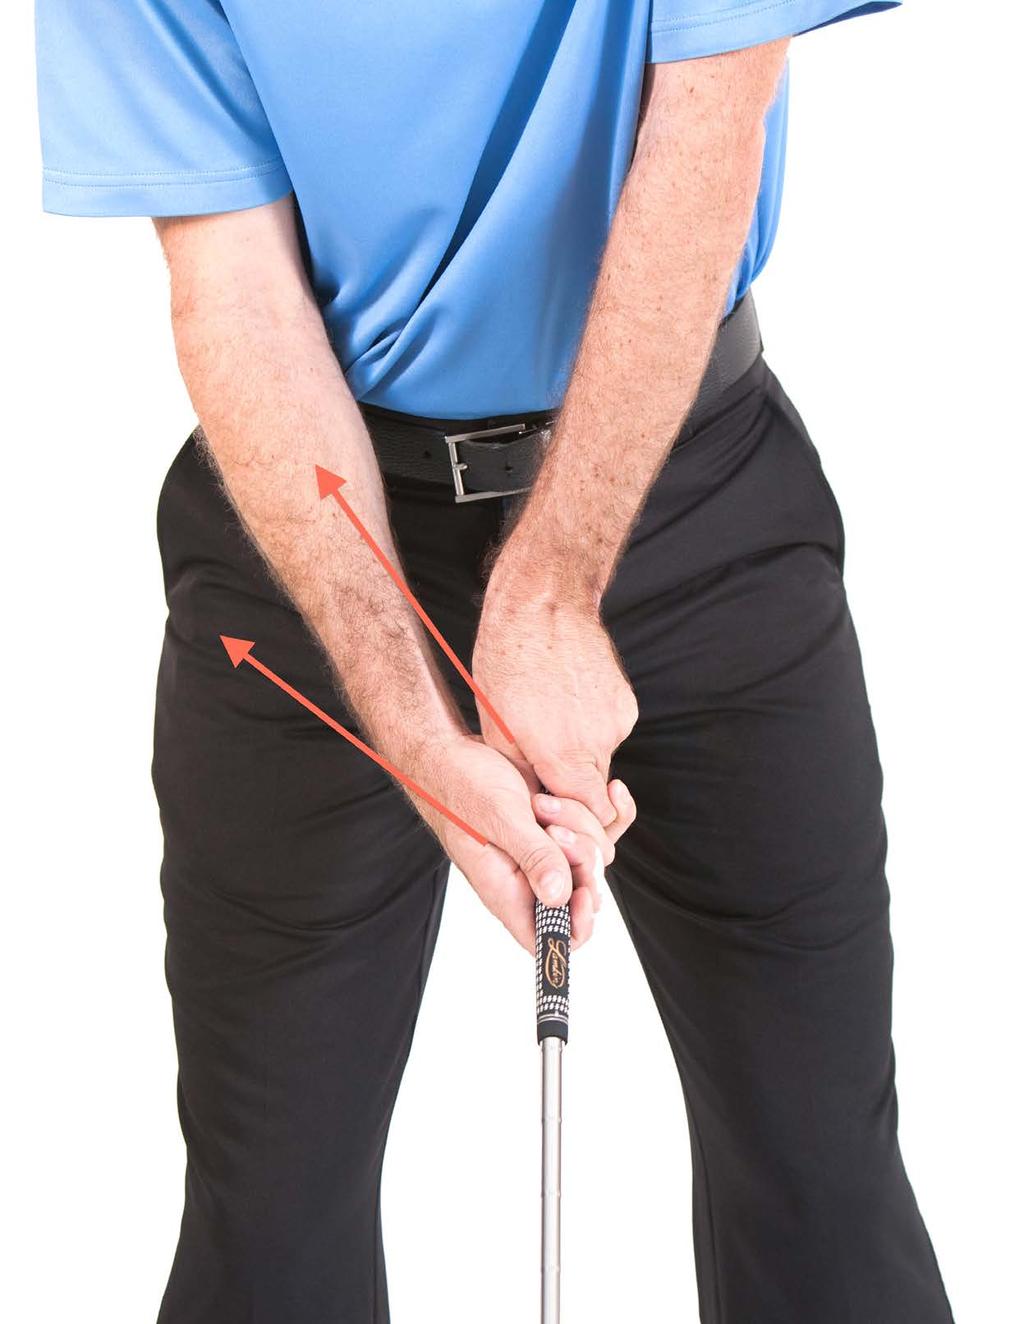 Hands Right, Closed Club Conversely, if you start with a grip that is rotated too far to the right, your club face will return back to the ball closed or facing to the left. Image 1.